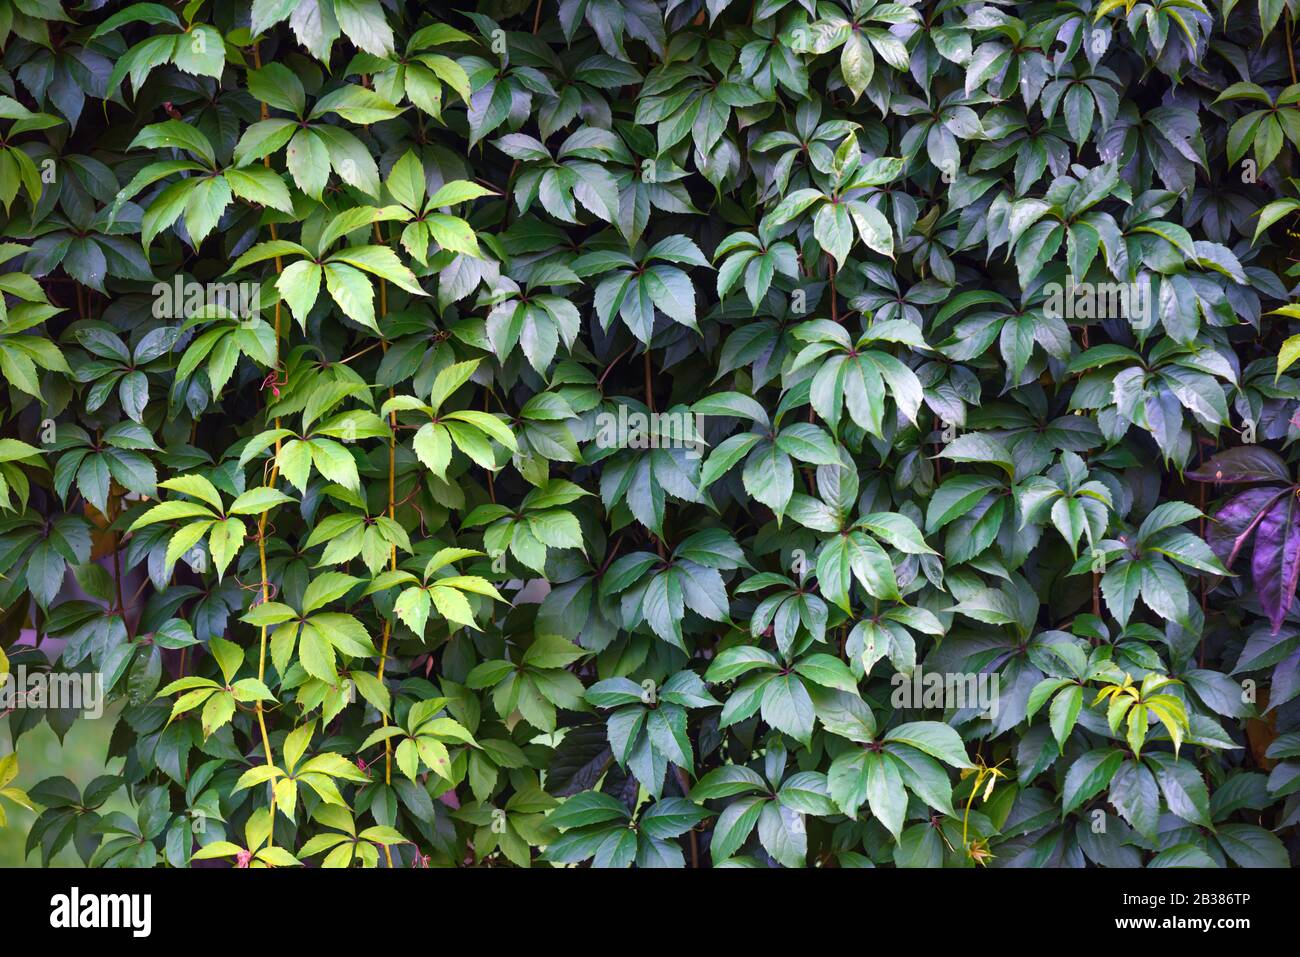 Texture of ivy leaves closeup. Green wall in garden. Gardening background Stock Photo